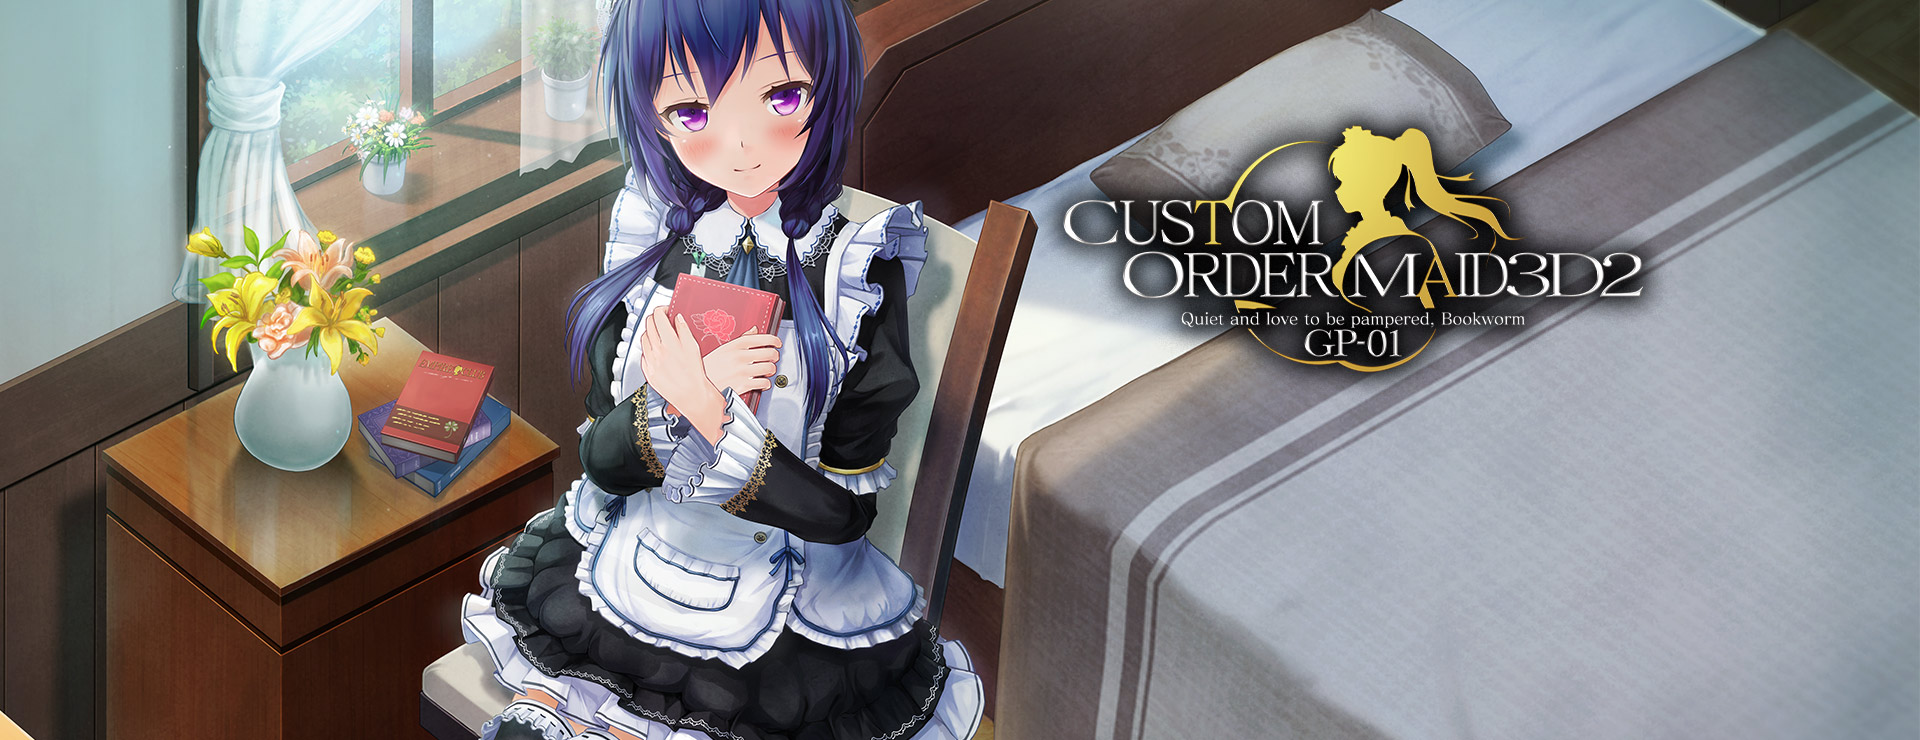 Custom Order Maid 3D2 - Quiet and love to be pampered Bookworm GP-01 DLC - Simulation Game